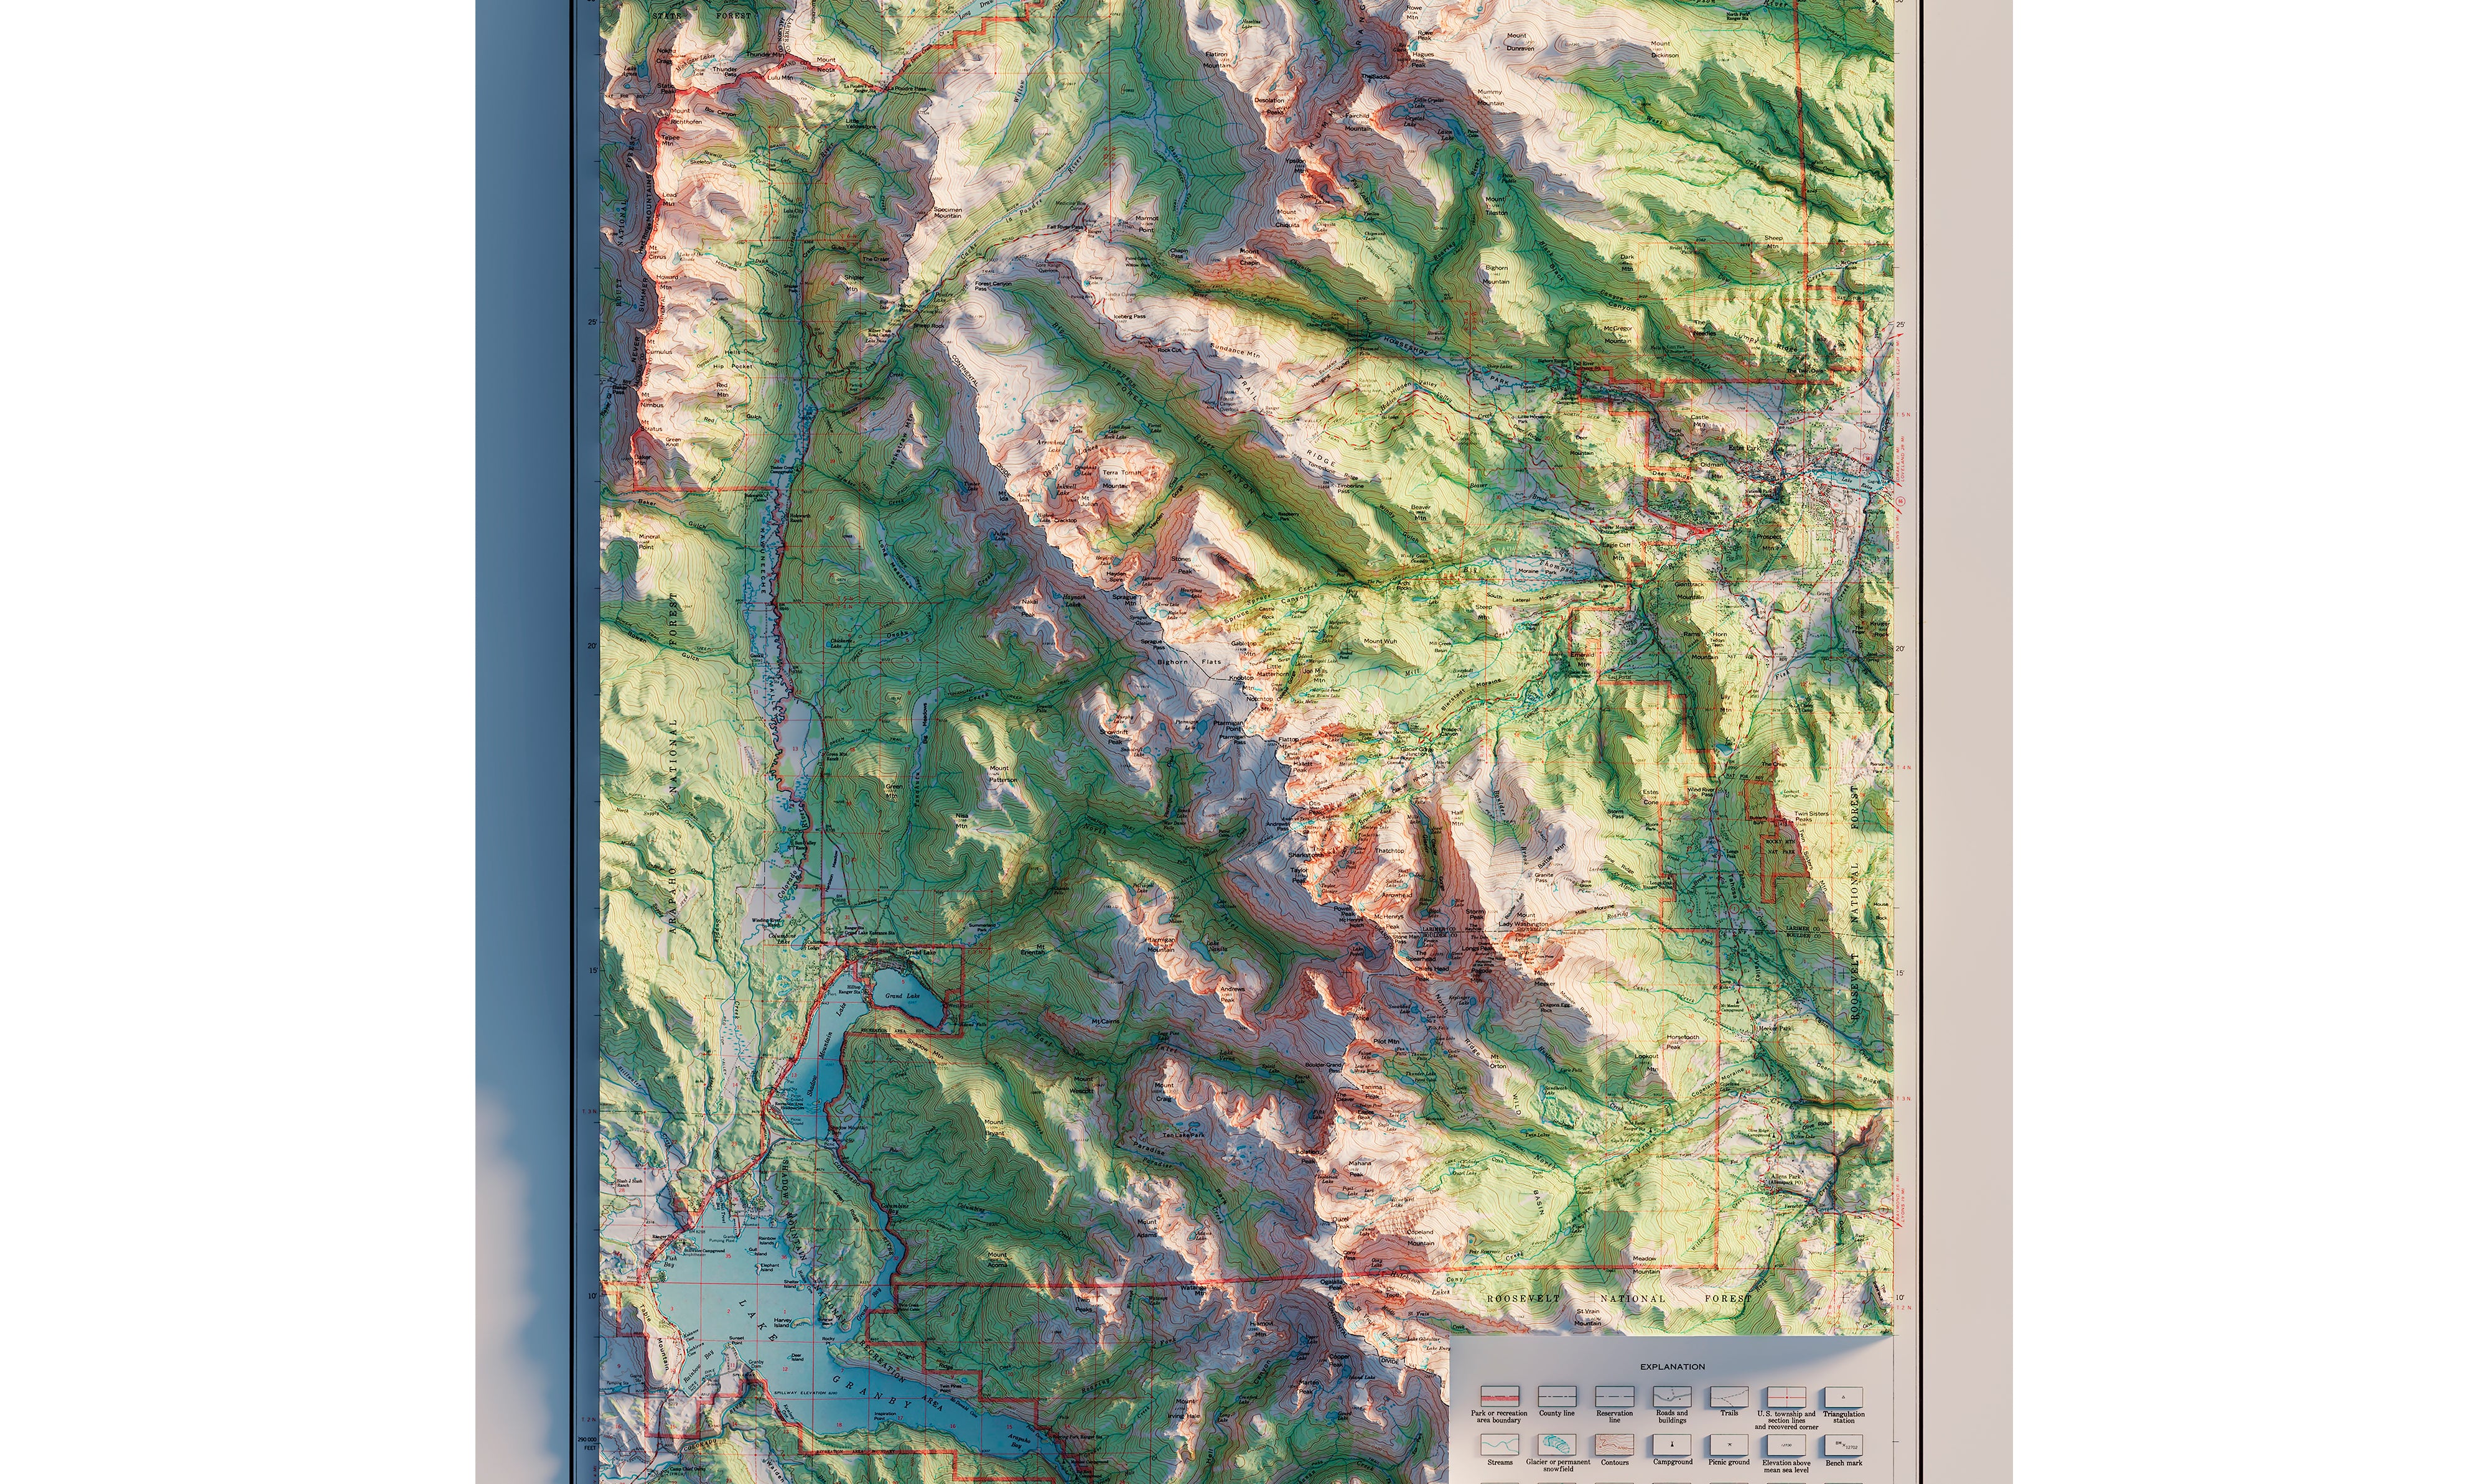 Vintage Rocky Mountain National Park Relief Map - 1961